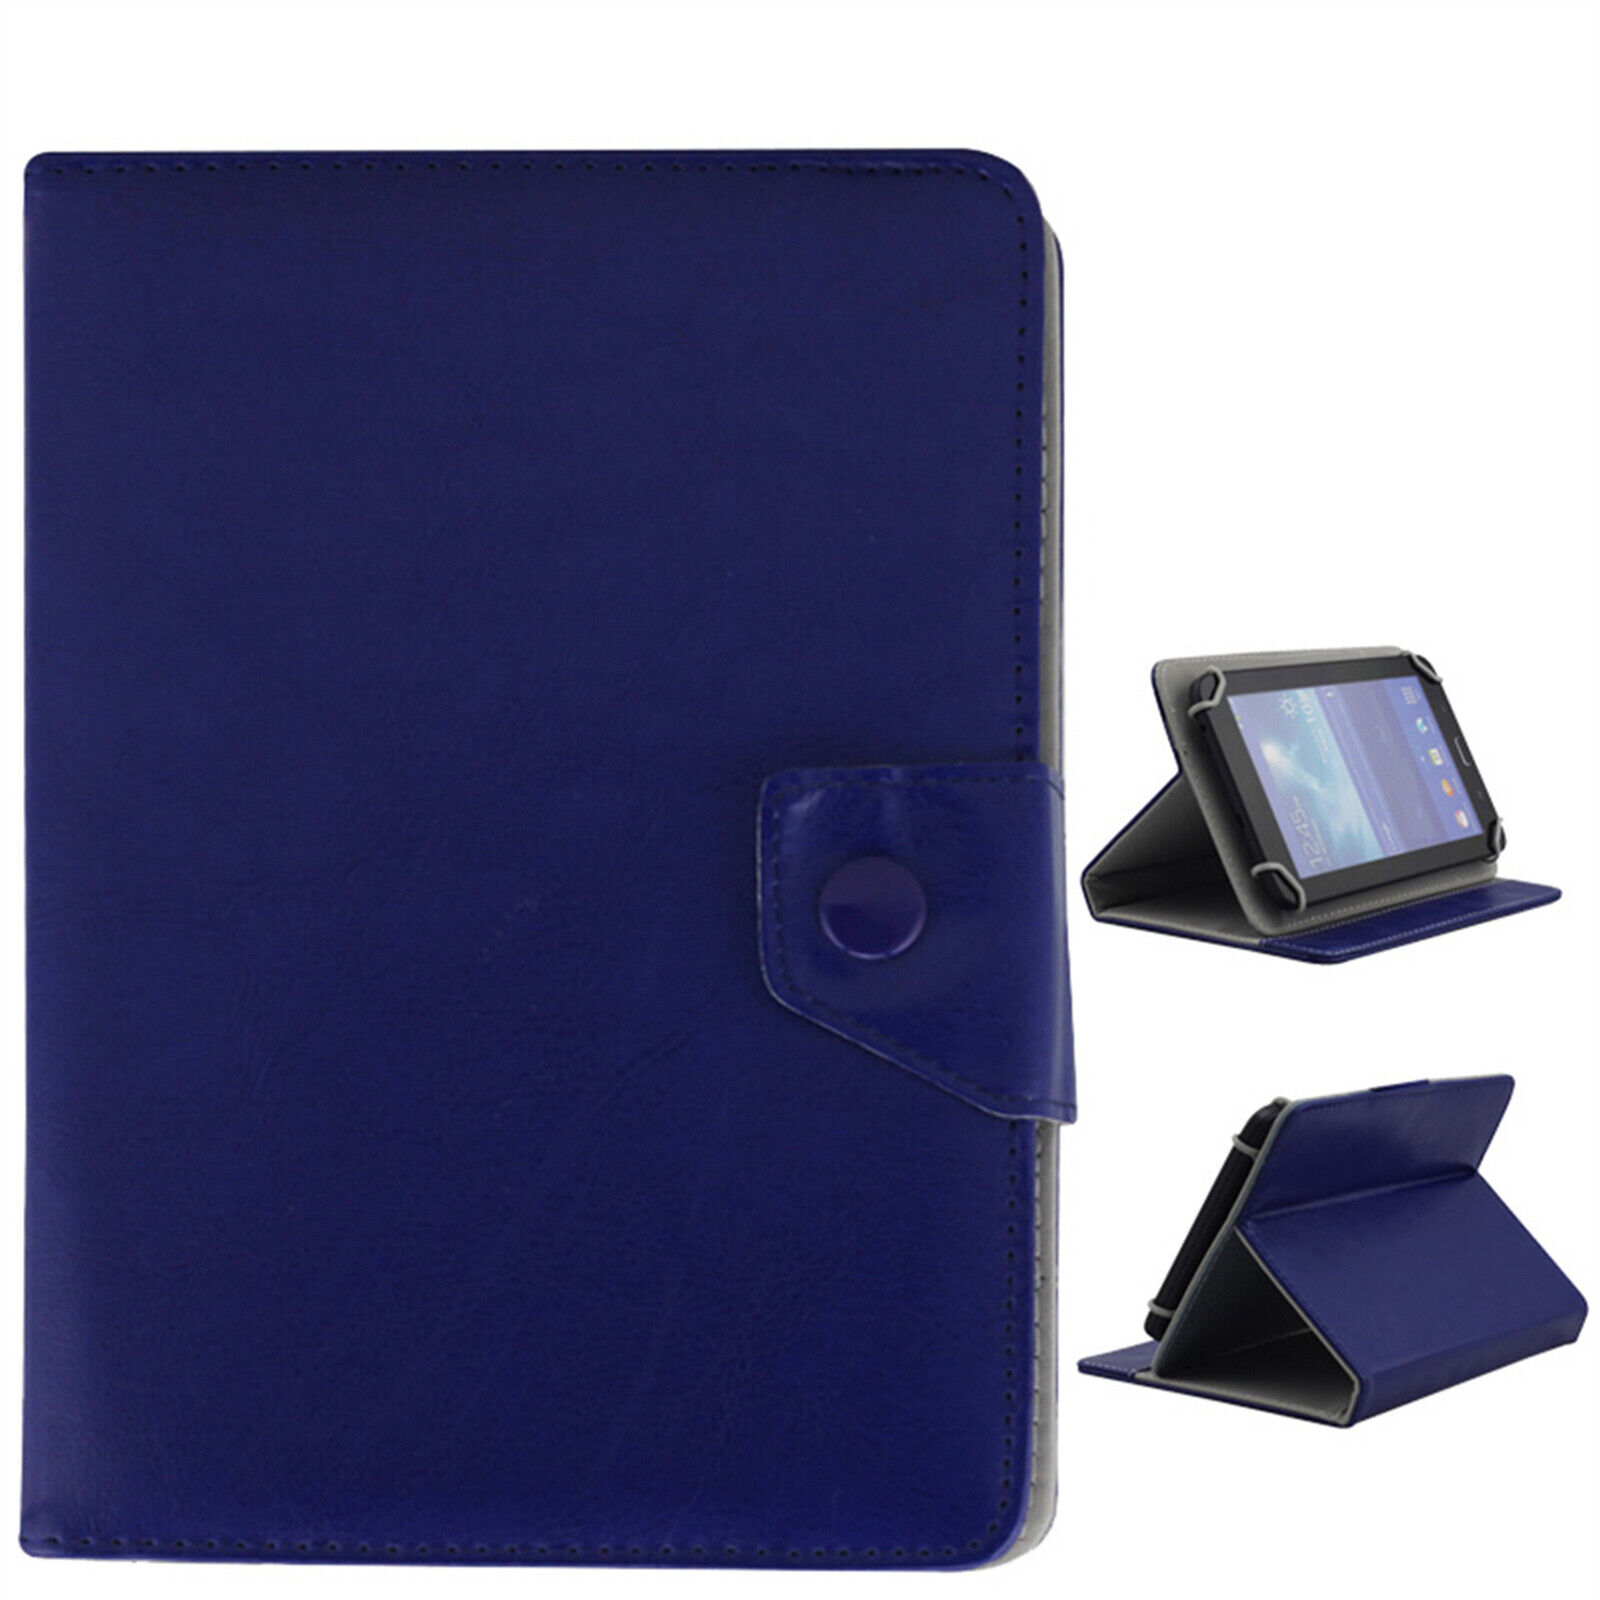 Universal Case for 7-12 Inch Tablet Folio Leather Book Style Protective Cover